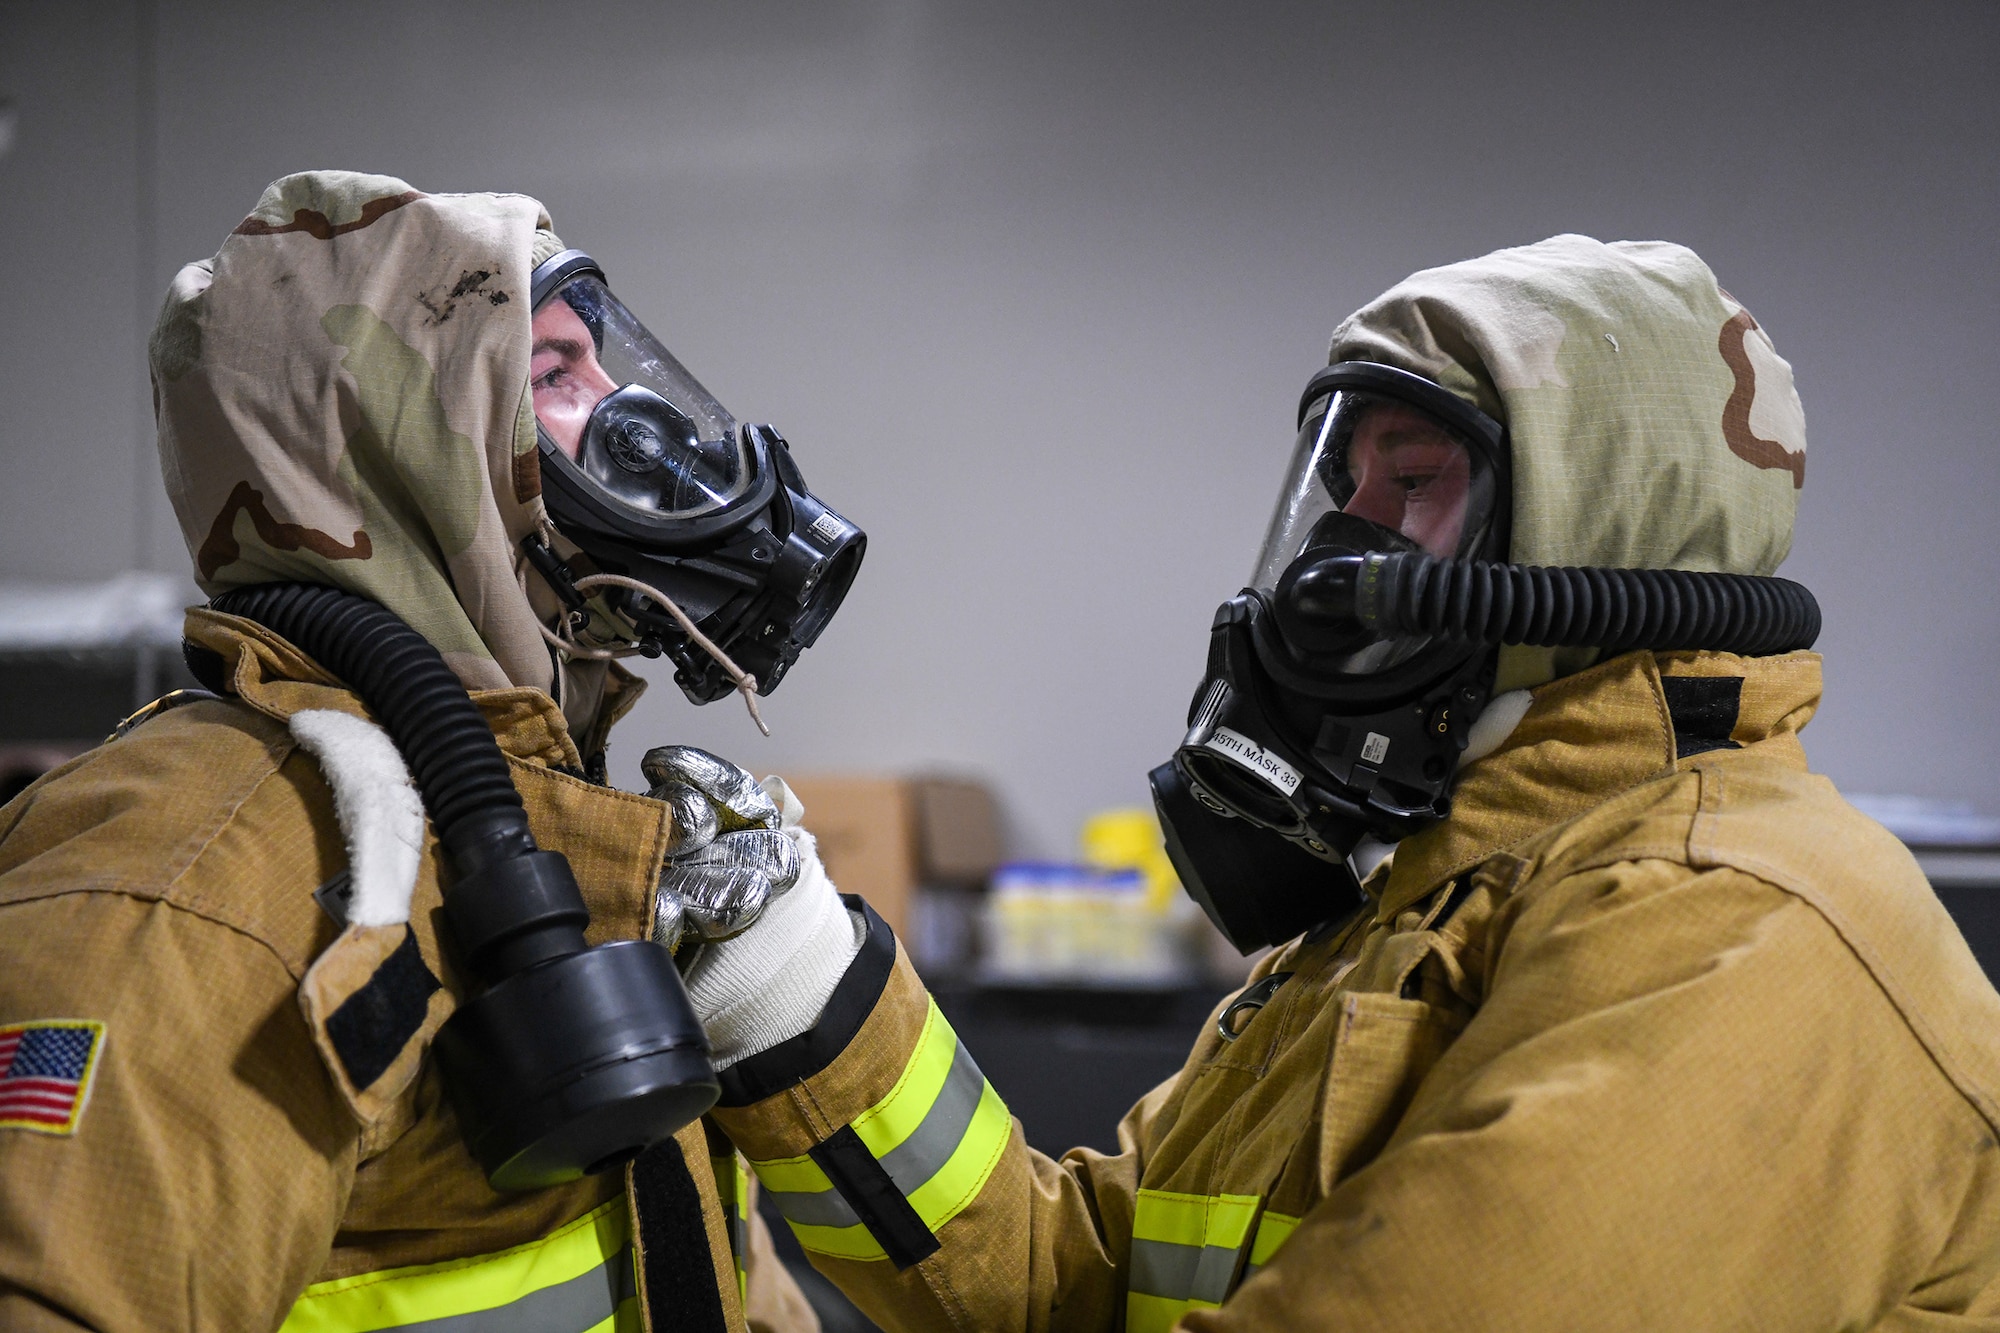 Airman 1st Class Jacob Jones secures Staff Sgt. Nathan Jennings’ suit during joint firefighter integrated response ensemble training, Feb. 13, 2022.